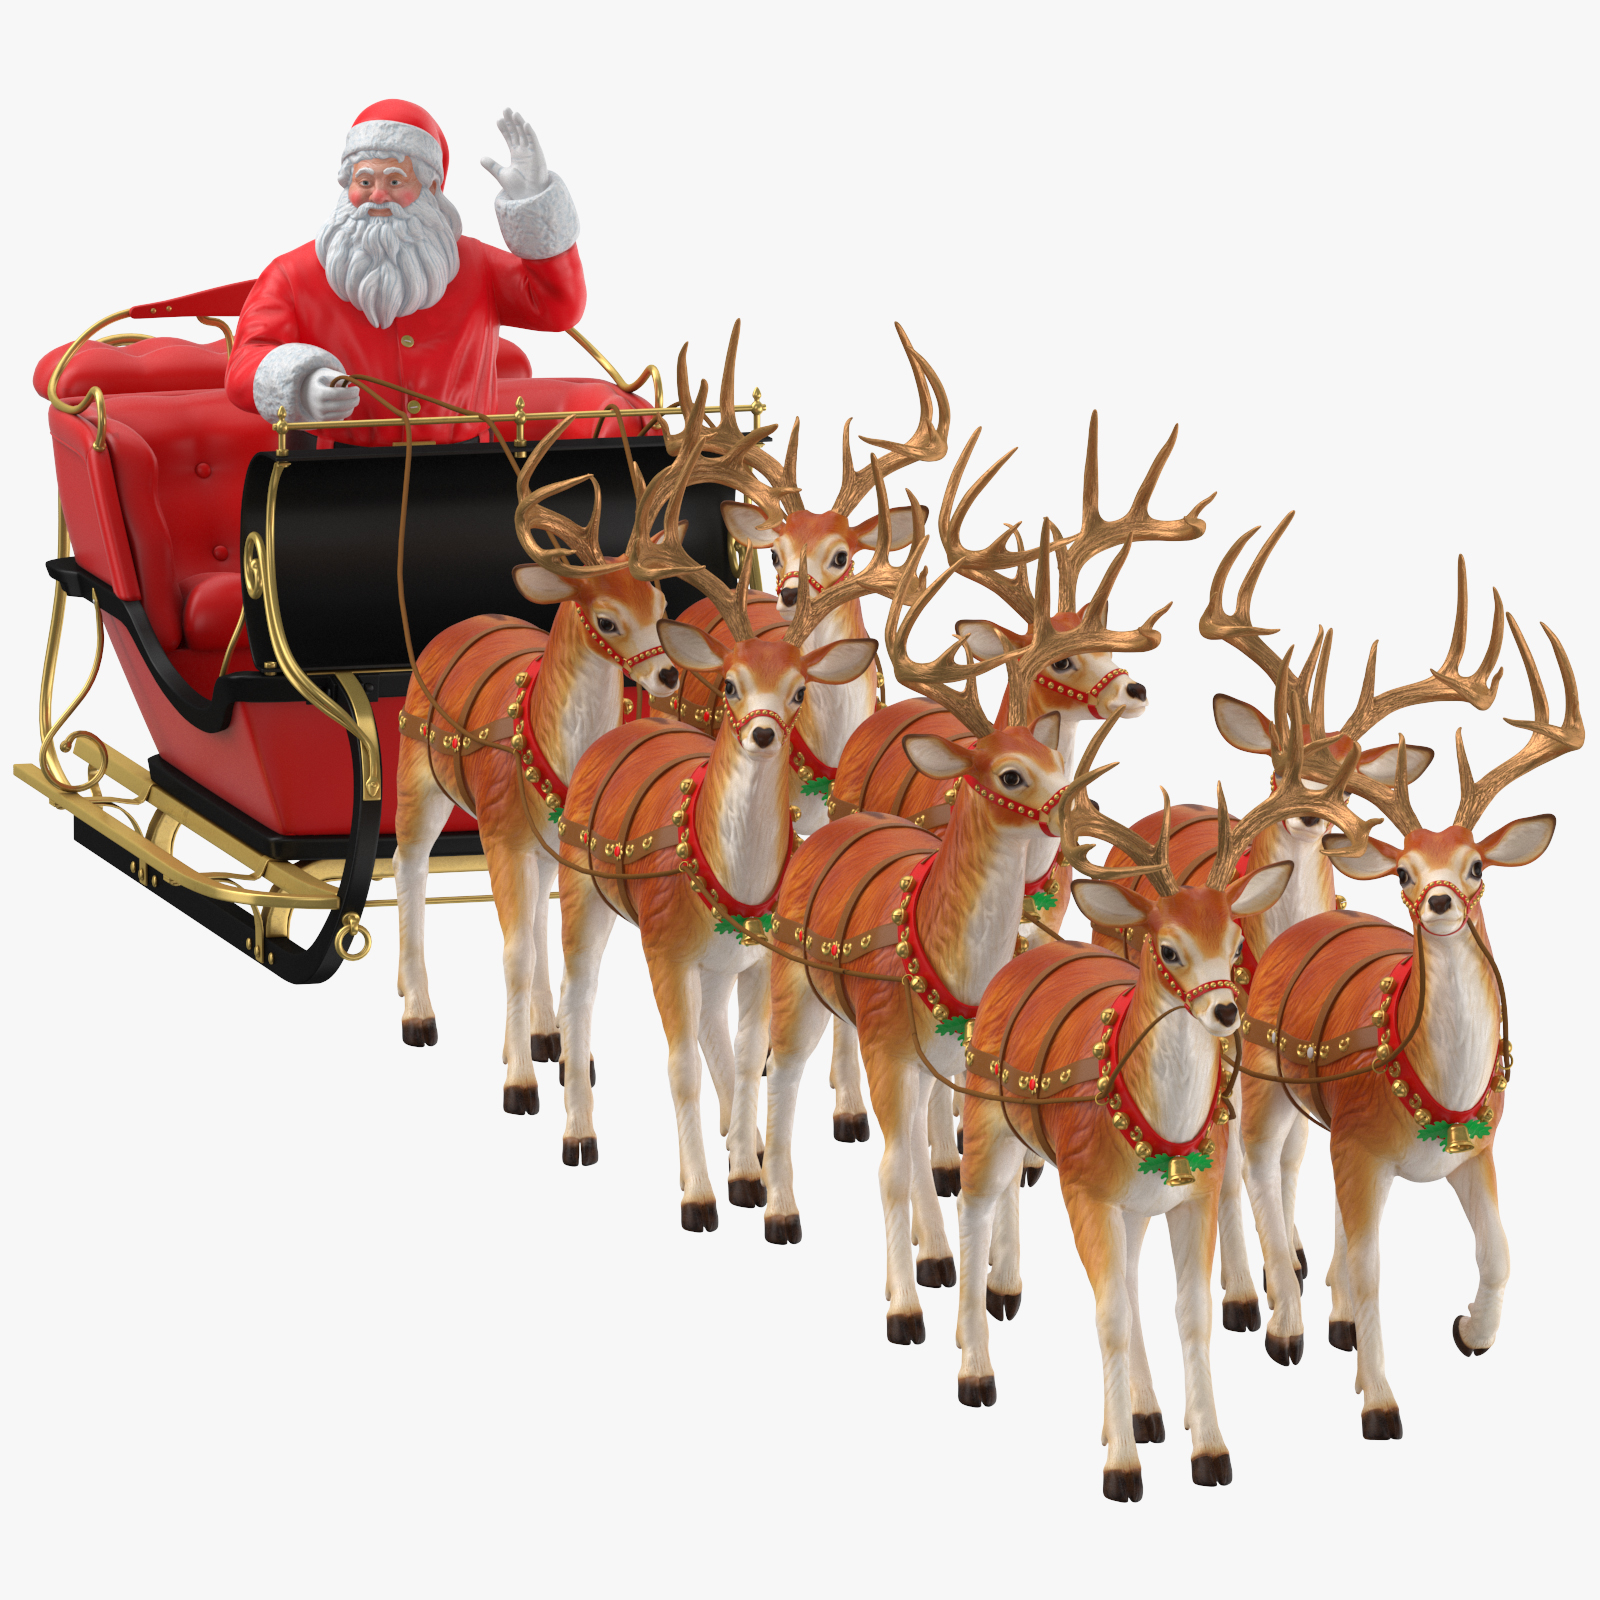 Download Images Of Real Santa Claus Sleigh And Reindeer